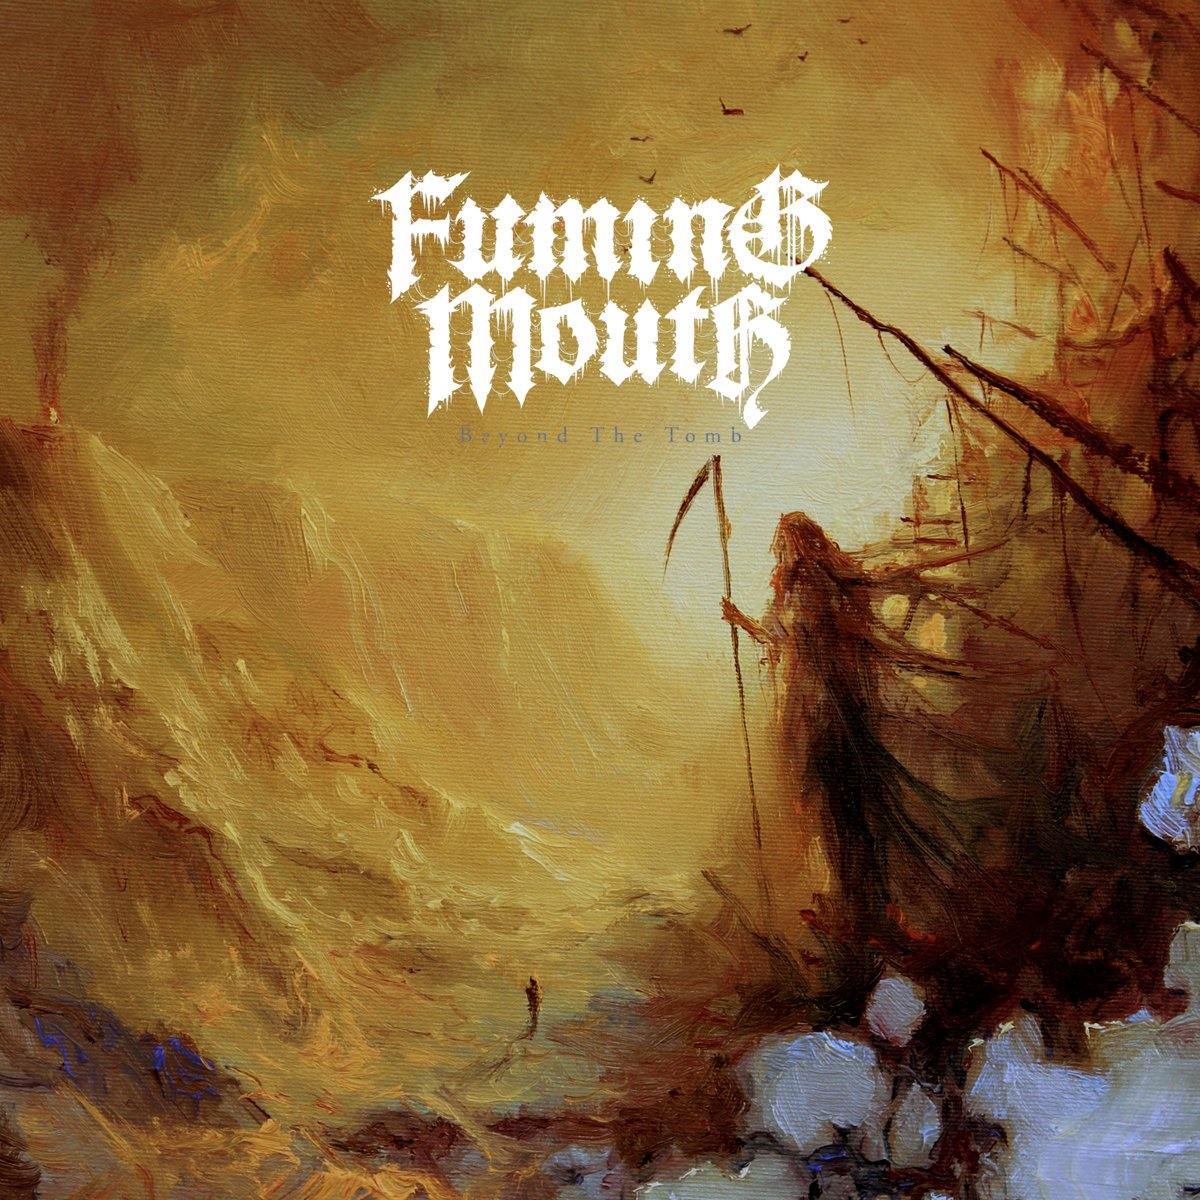 Buy – Fuming Mouth "Beyond the Tomb" 12" – Band & Music Merch – Cold Cuts Merch